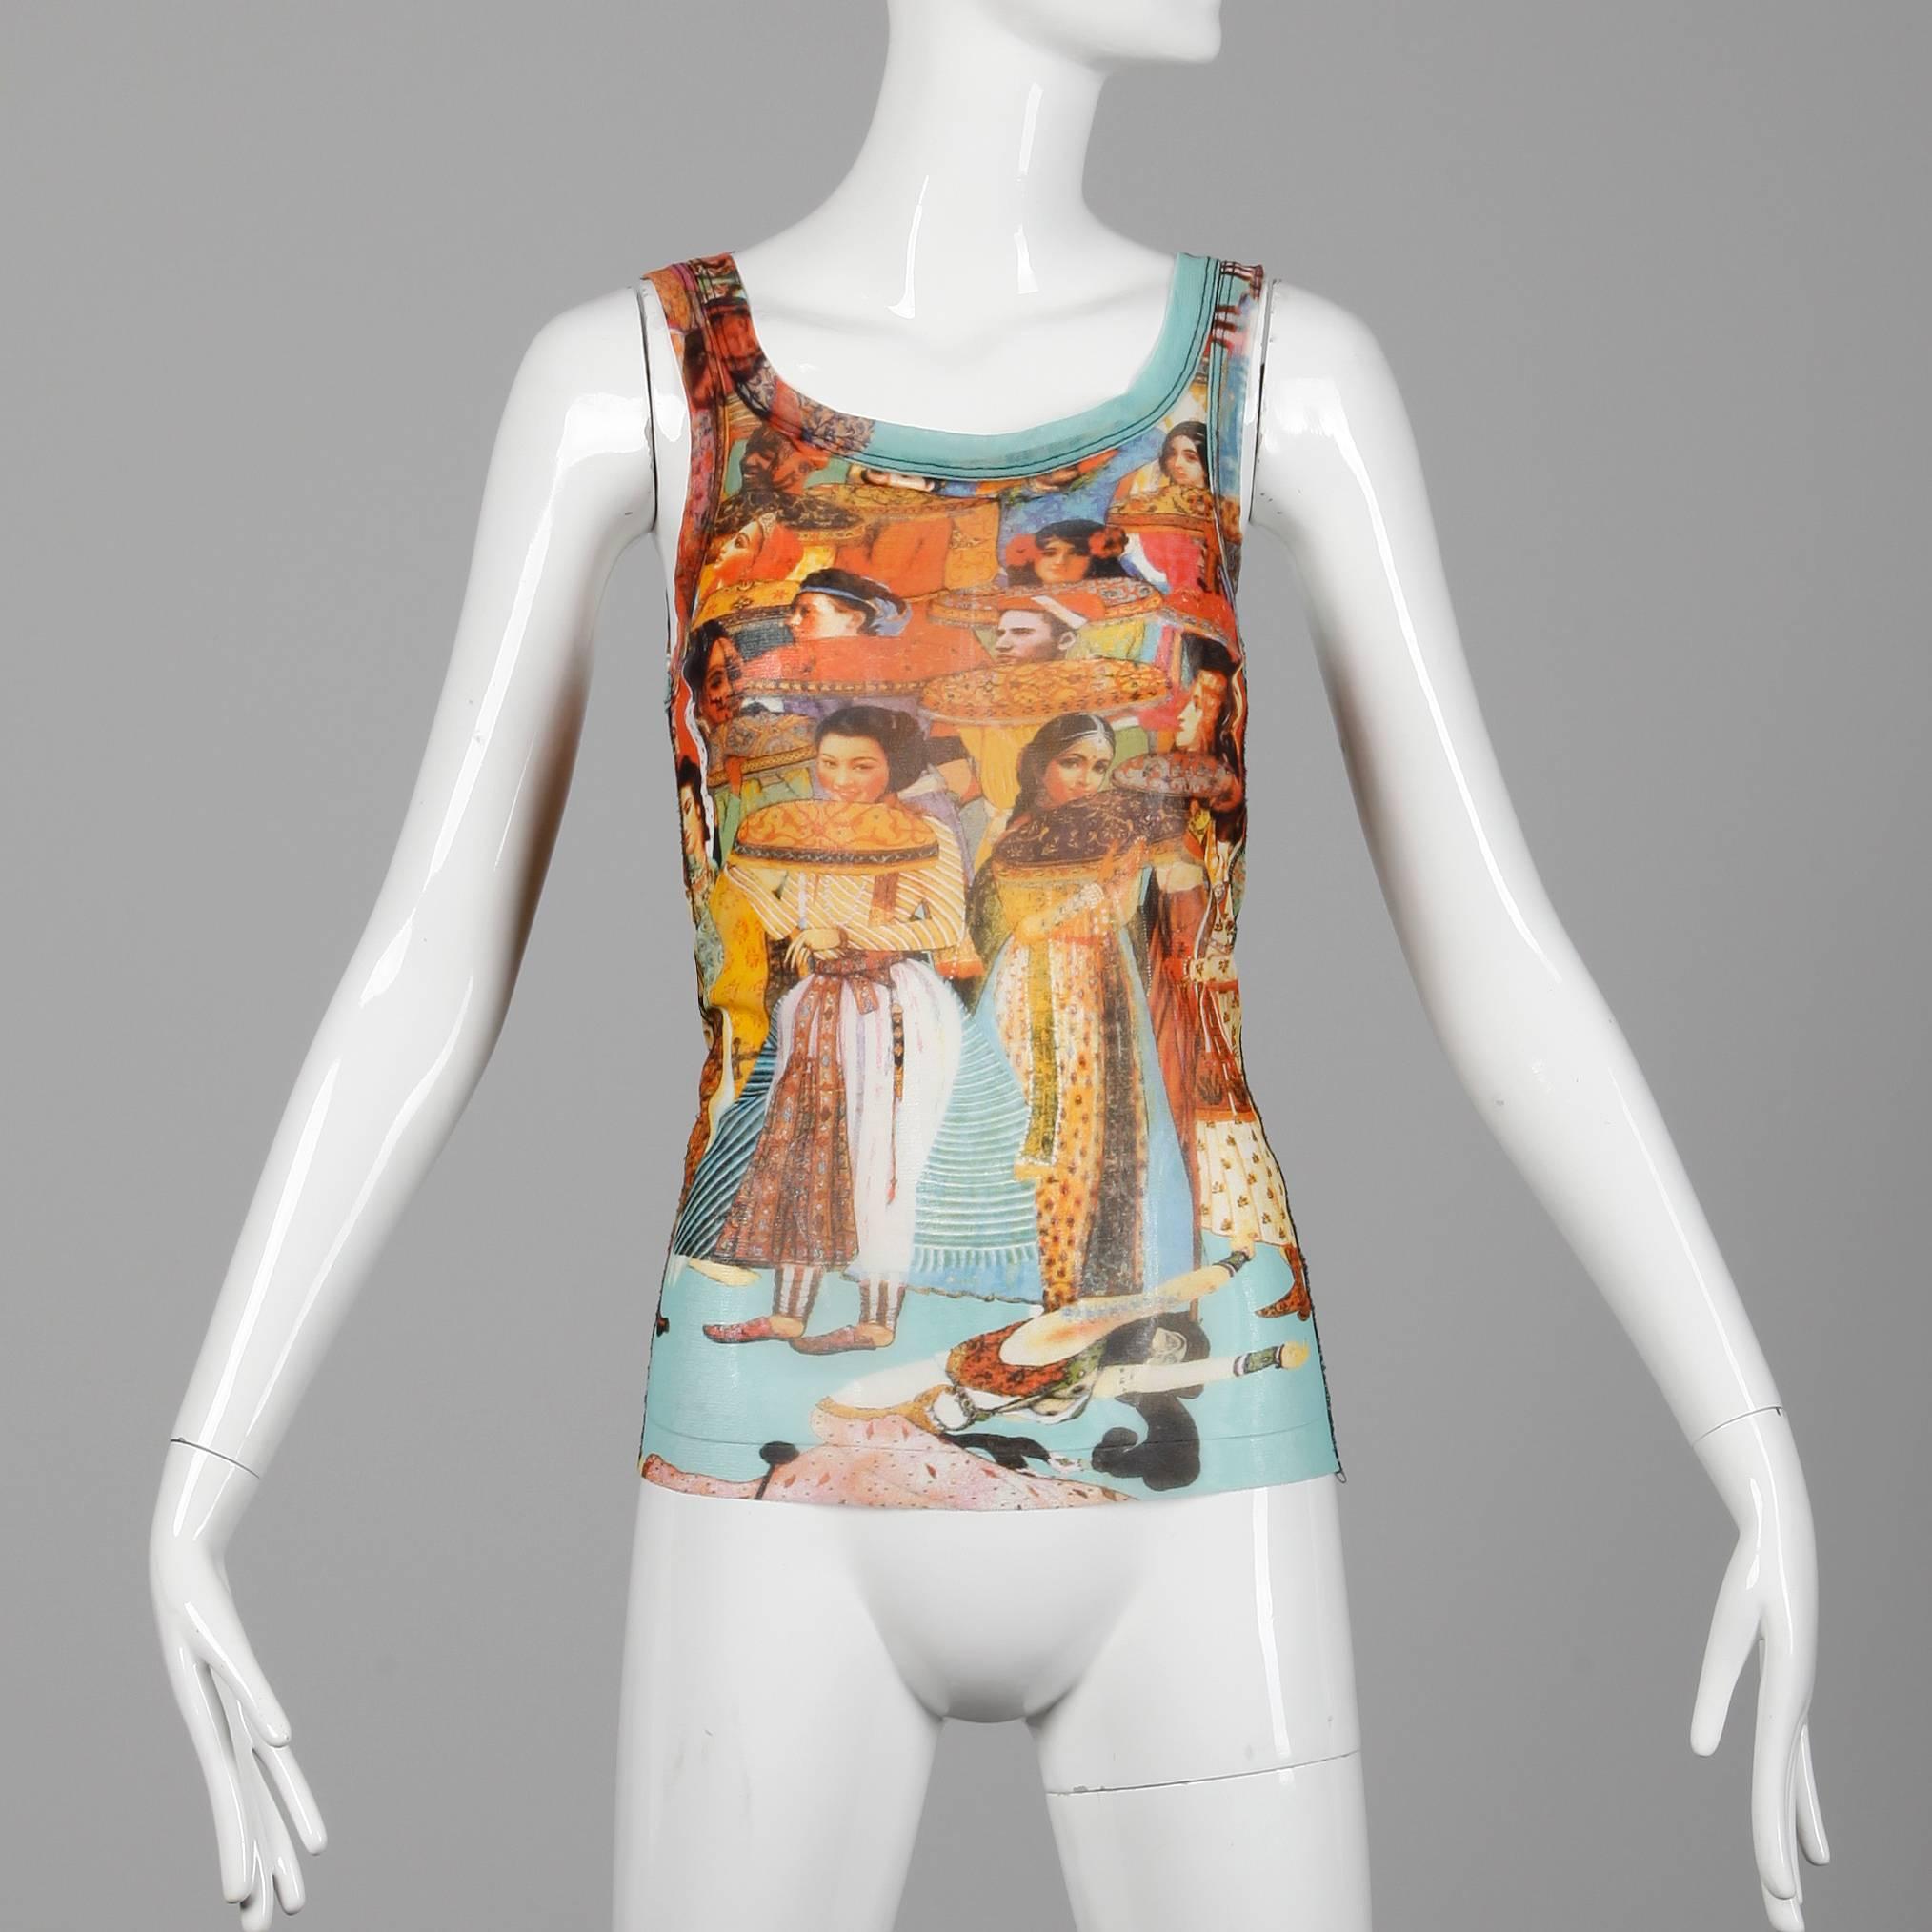 Jean Paul Gaultier mesh tank top in iconic Asian + Indian face and people print. Unlined with no closure (pulls on over the head). The marked size is medium, but this will also likely fit a small and a large as well due to the stretch of the fabric.